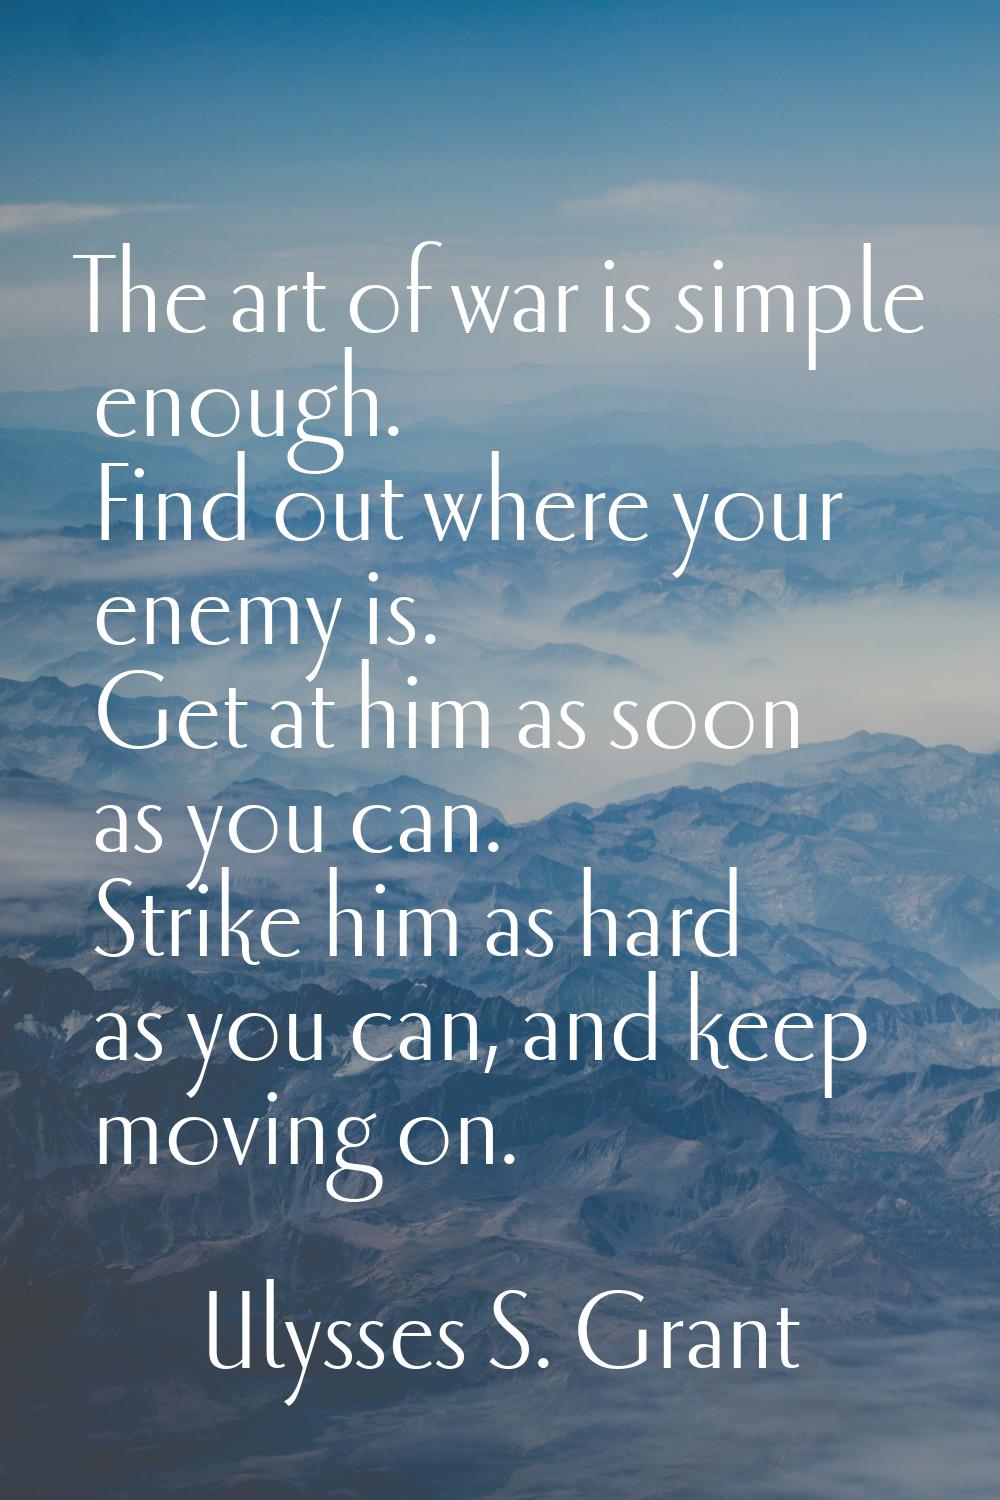 The art of war is simple enough. Find out where your enemy is. Get at him as soon as you can. Strik